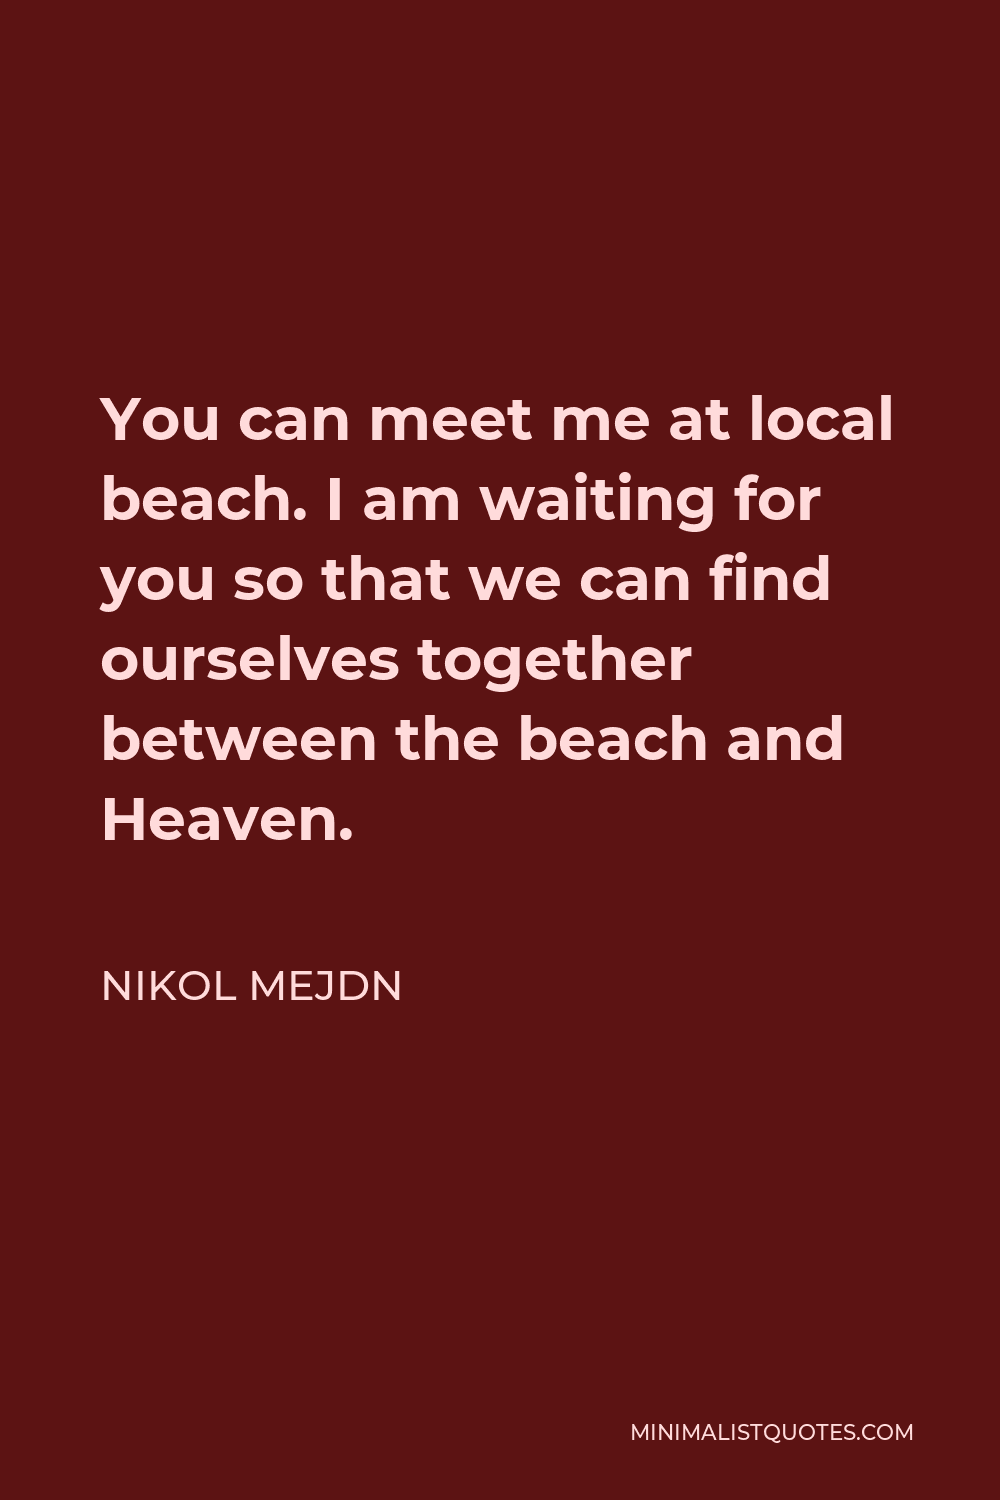 Nikol Mejdn Quote - You can meet me at local beach. I am waiting for you so that we can find ourselves together between the beach and Heaven.